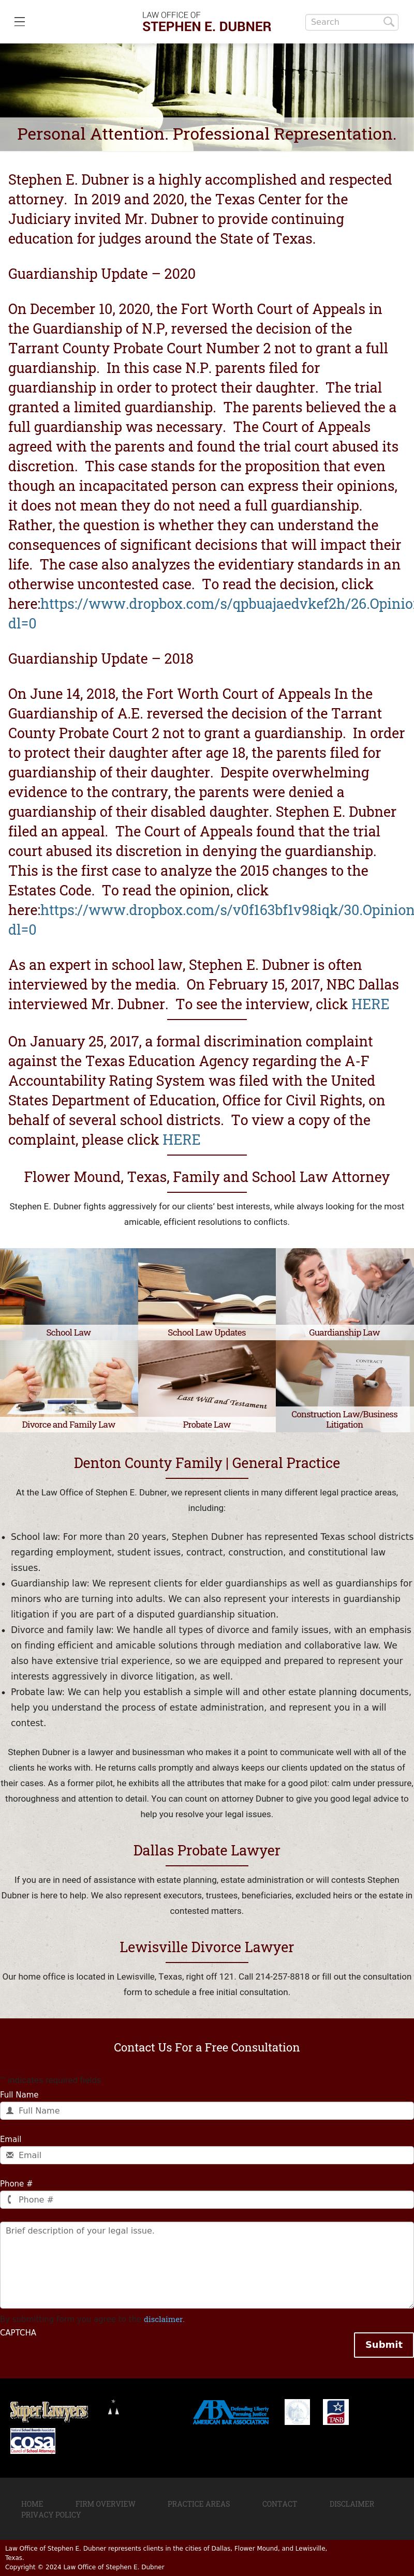 Law Office of Stephen E. Dubner - Flower Mound TX Lawyers